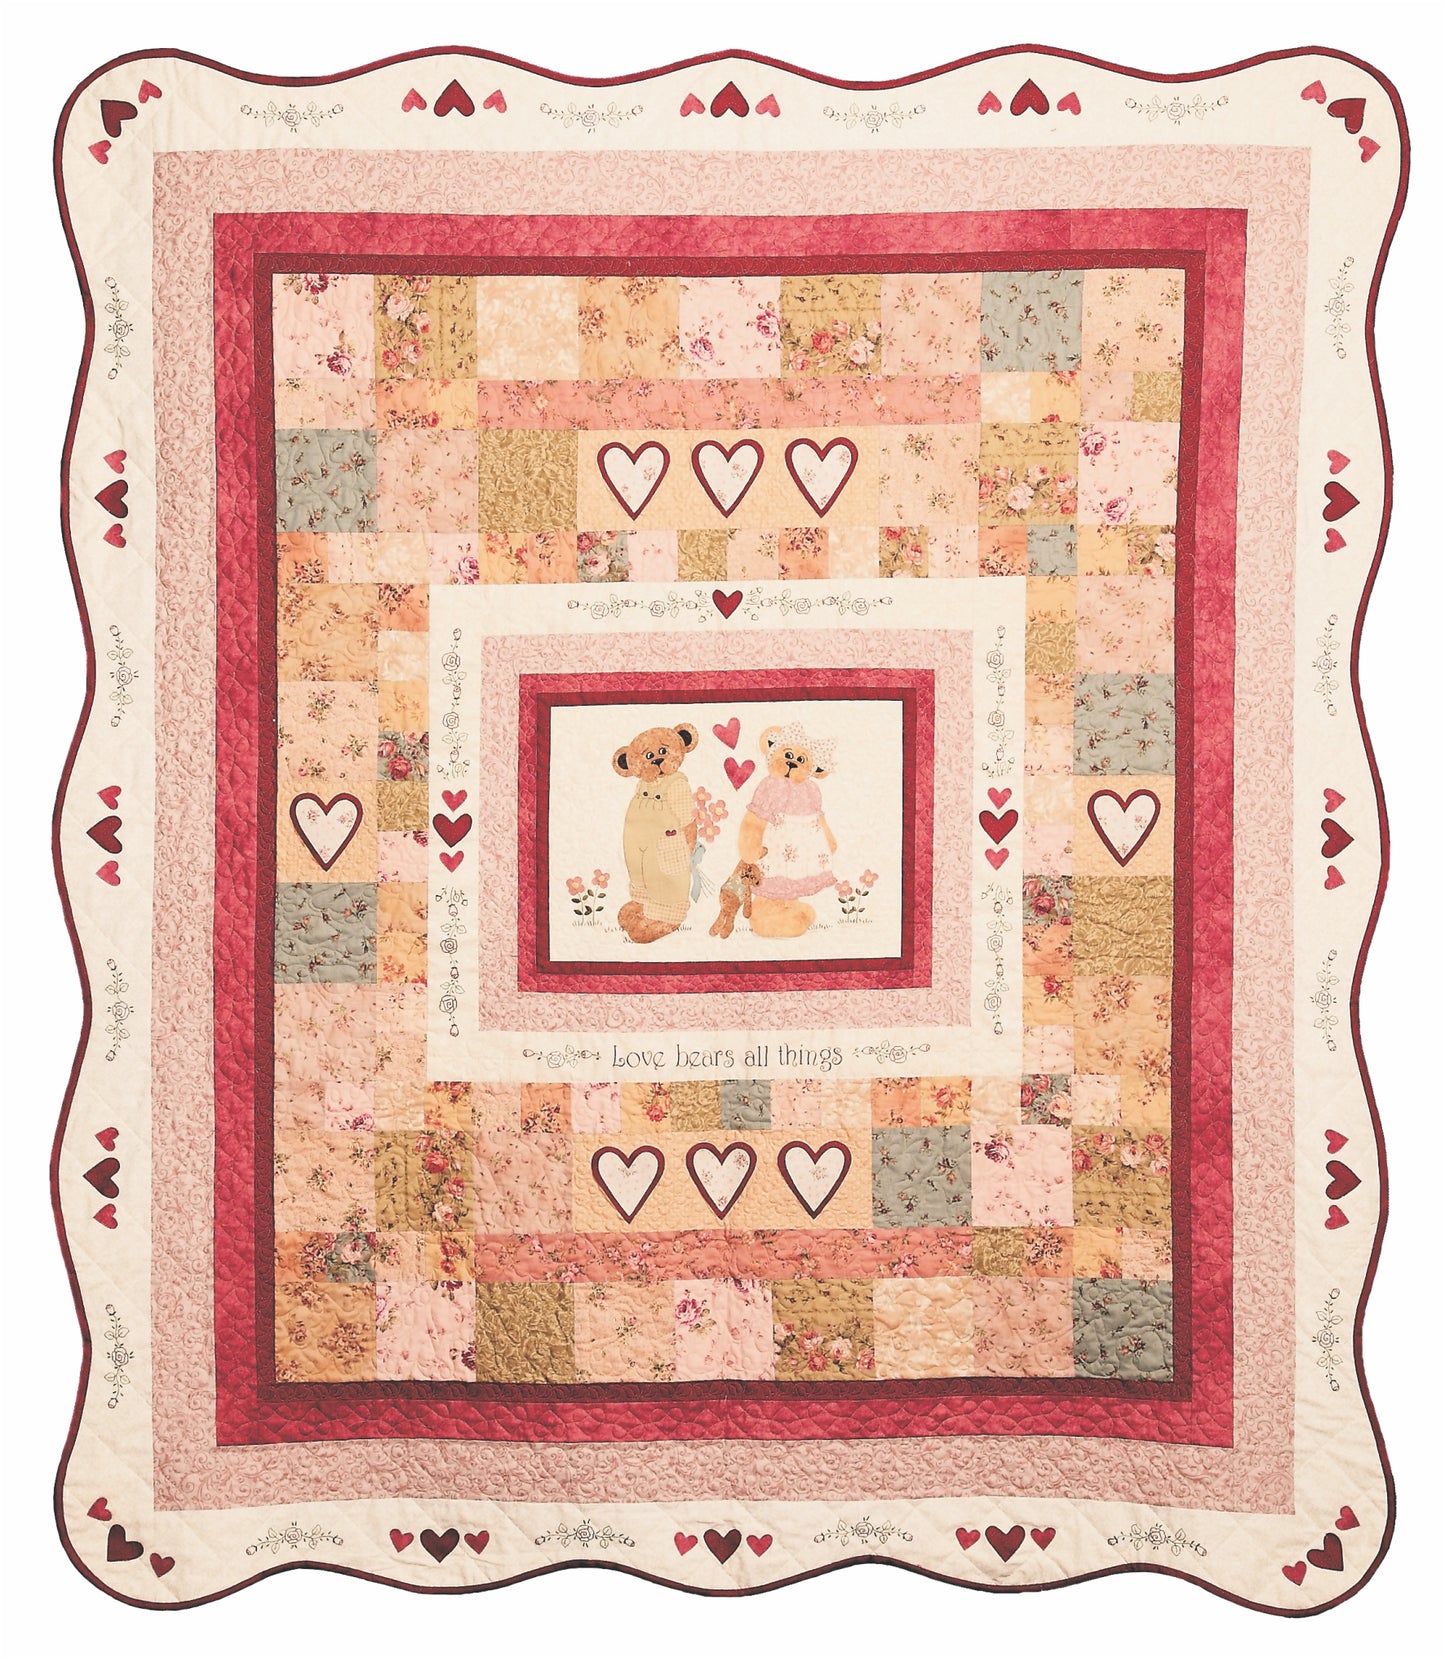 LOVE BEARS ALL THINGS QUILT - Downloadable pattern